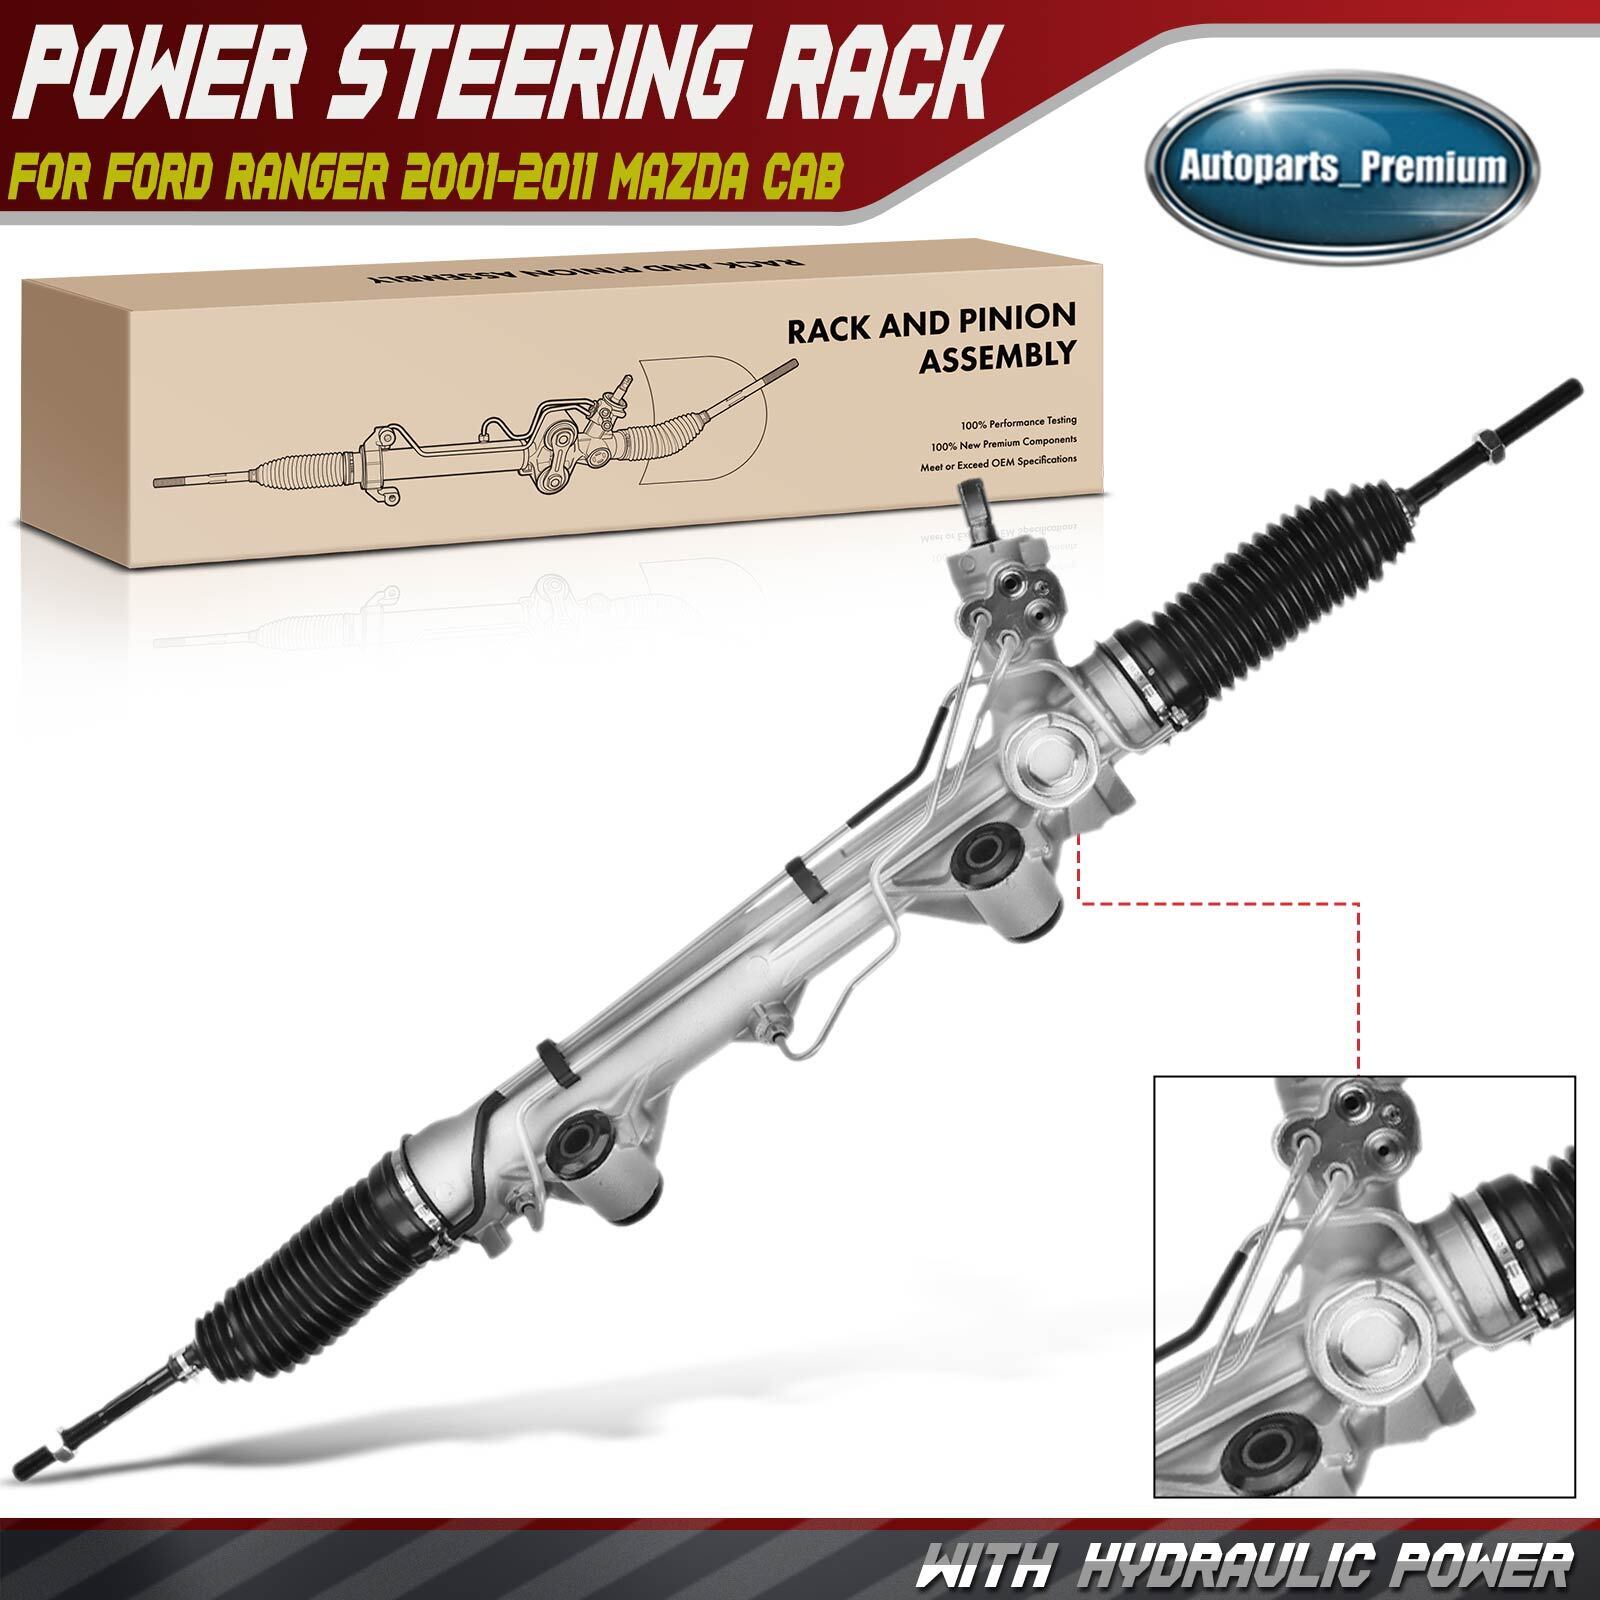 Complete Power Steering Rack and Pinion Gear for Ford Ranger 2001-2011 Mazda Cab